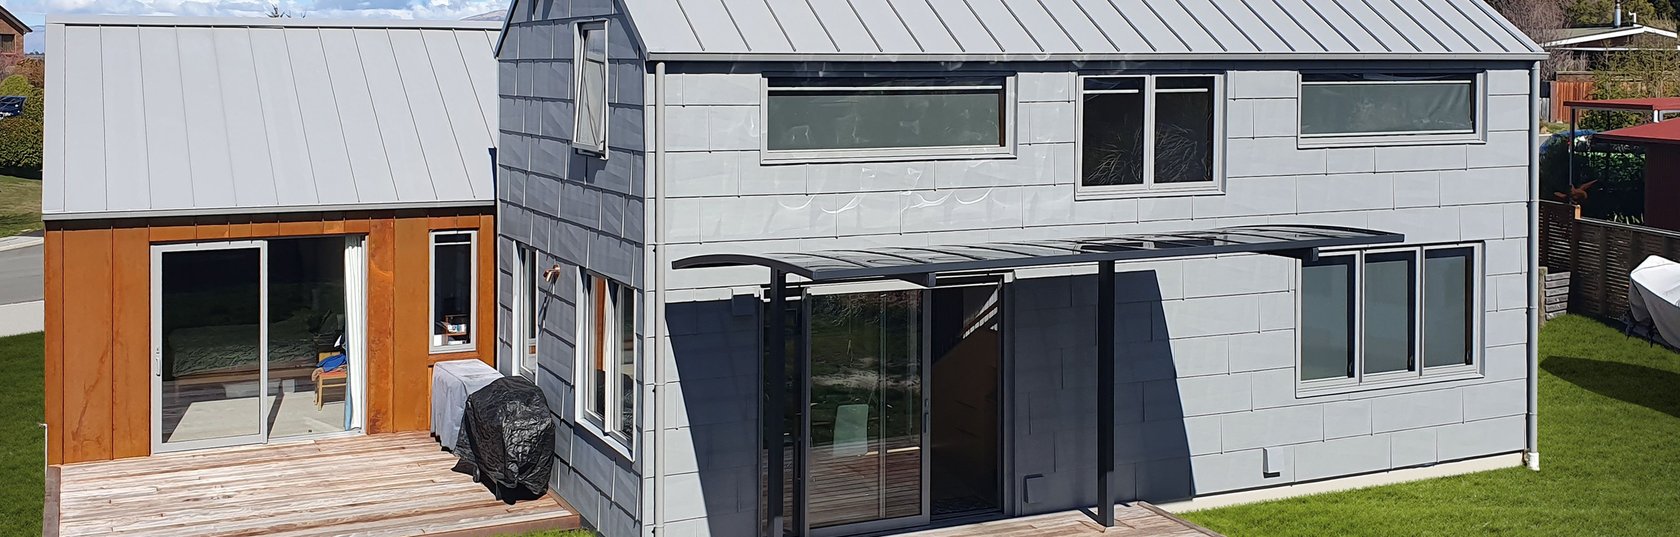 The new generation of aluminium roofing and cladding